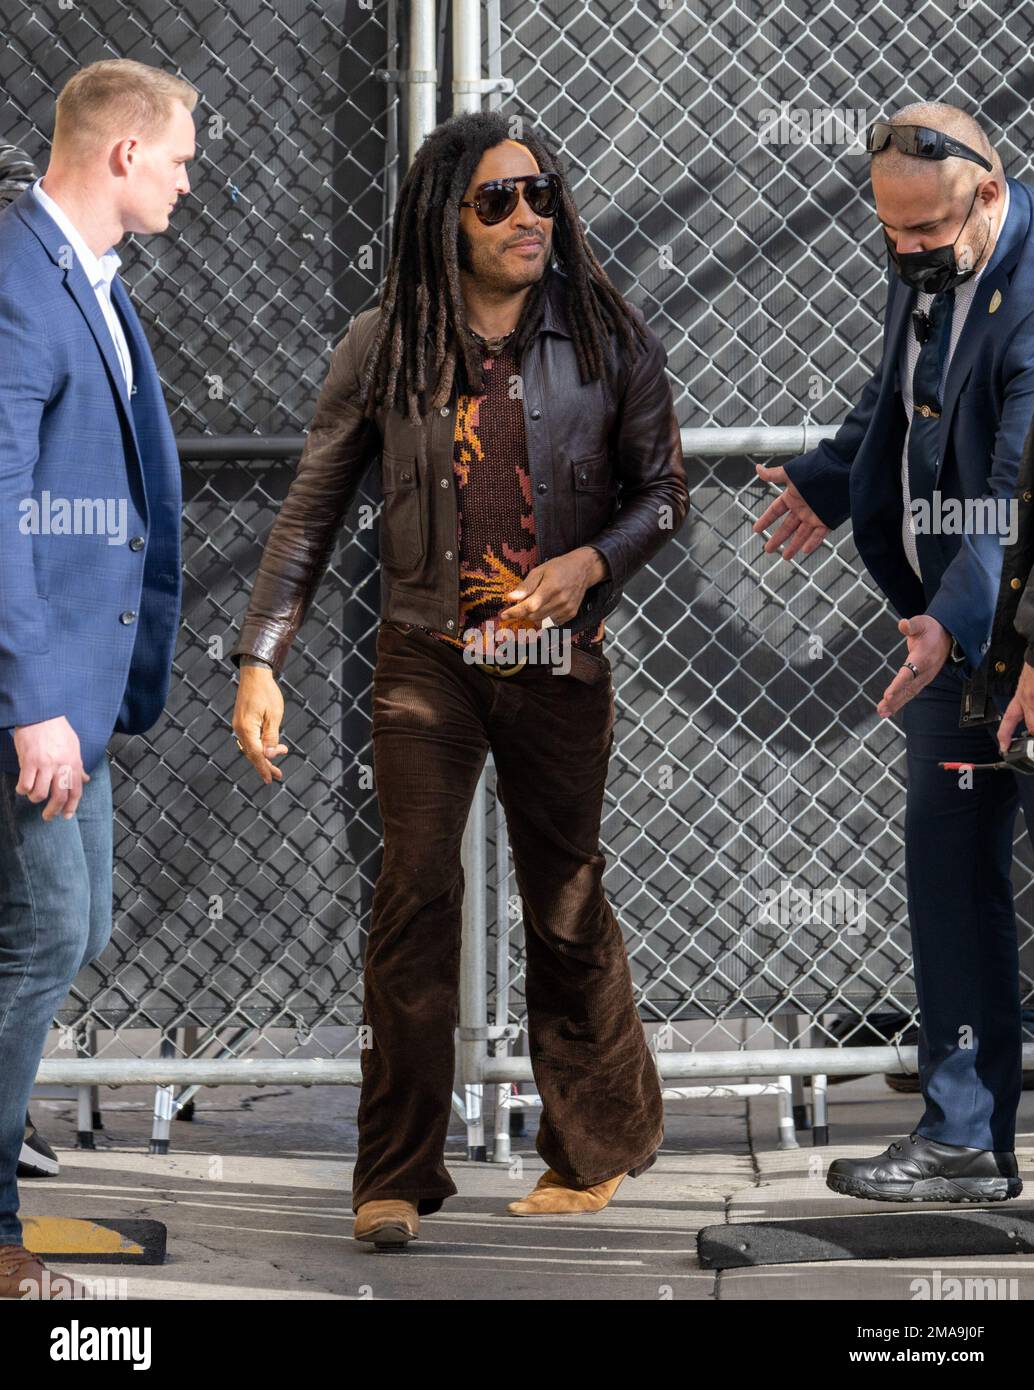 Los Angeles, California, USA. 18th January, 2023. Lenny Kravitz seen at Jimmy Kimmel Live! in Los Angeles, California. January 18, 2023. Credit: BauerGriffin/MediaPunch Credit: MediaPunch Inc/Alamy Live News Stock Photo